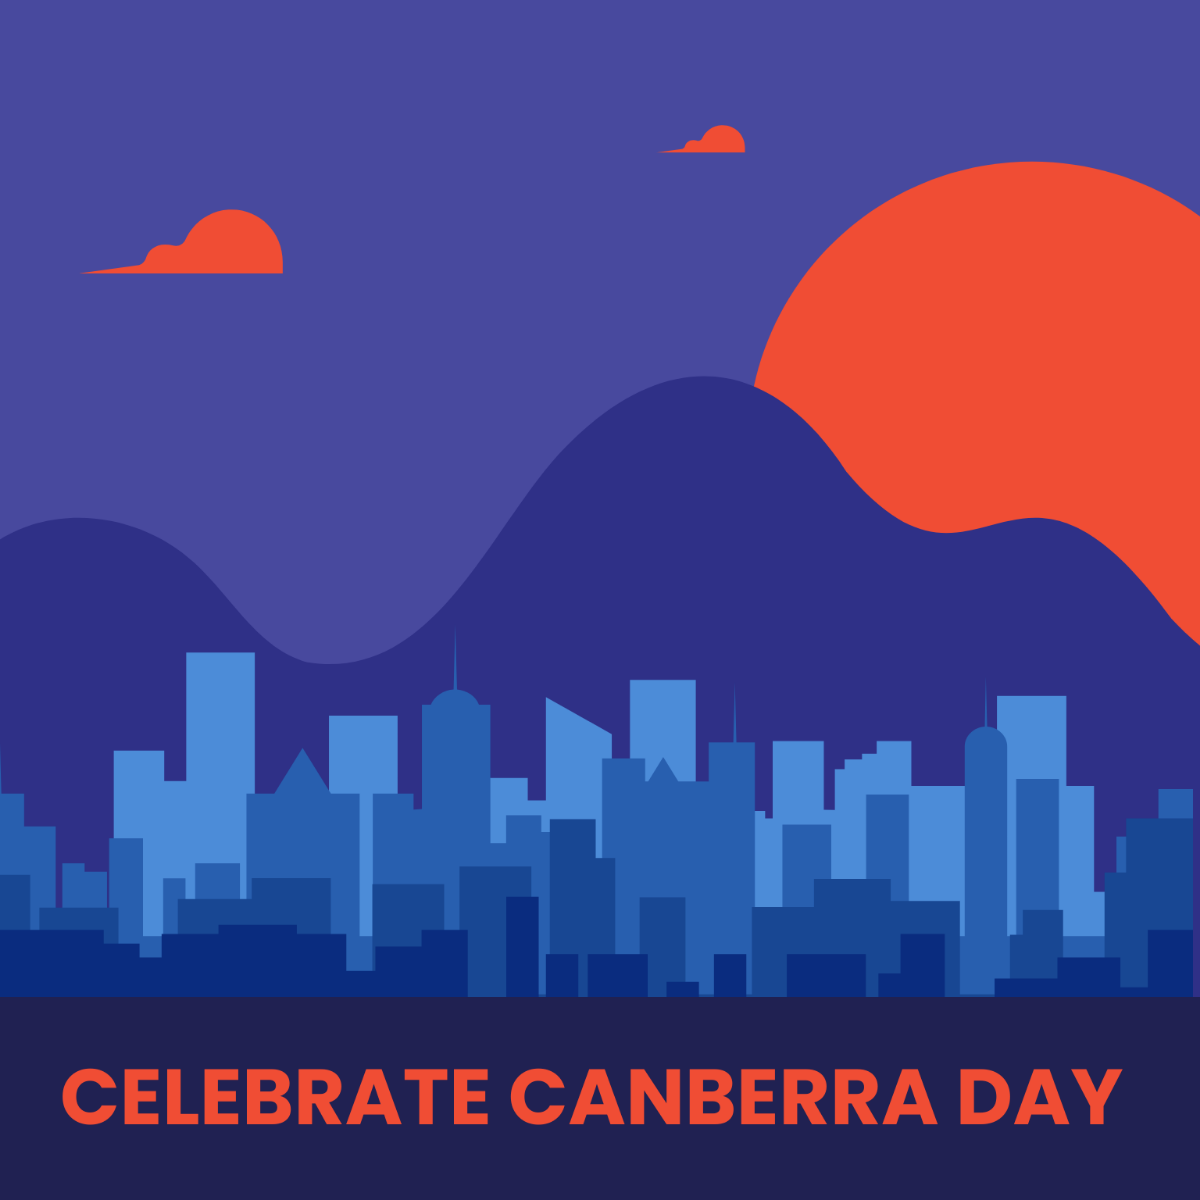 Canberra Day Poster Vector Template